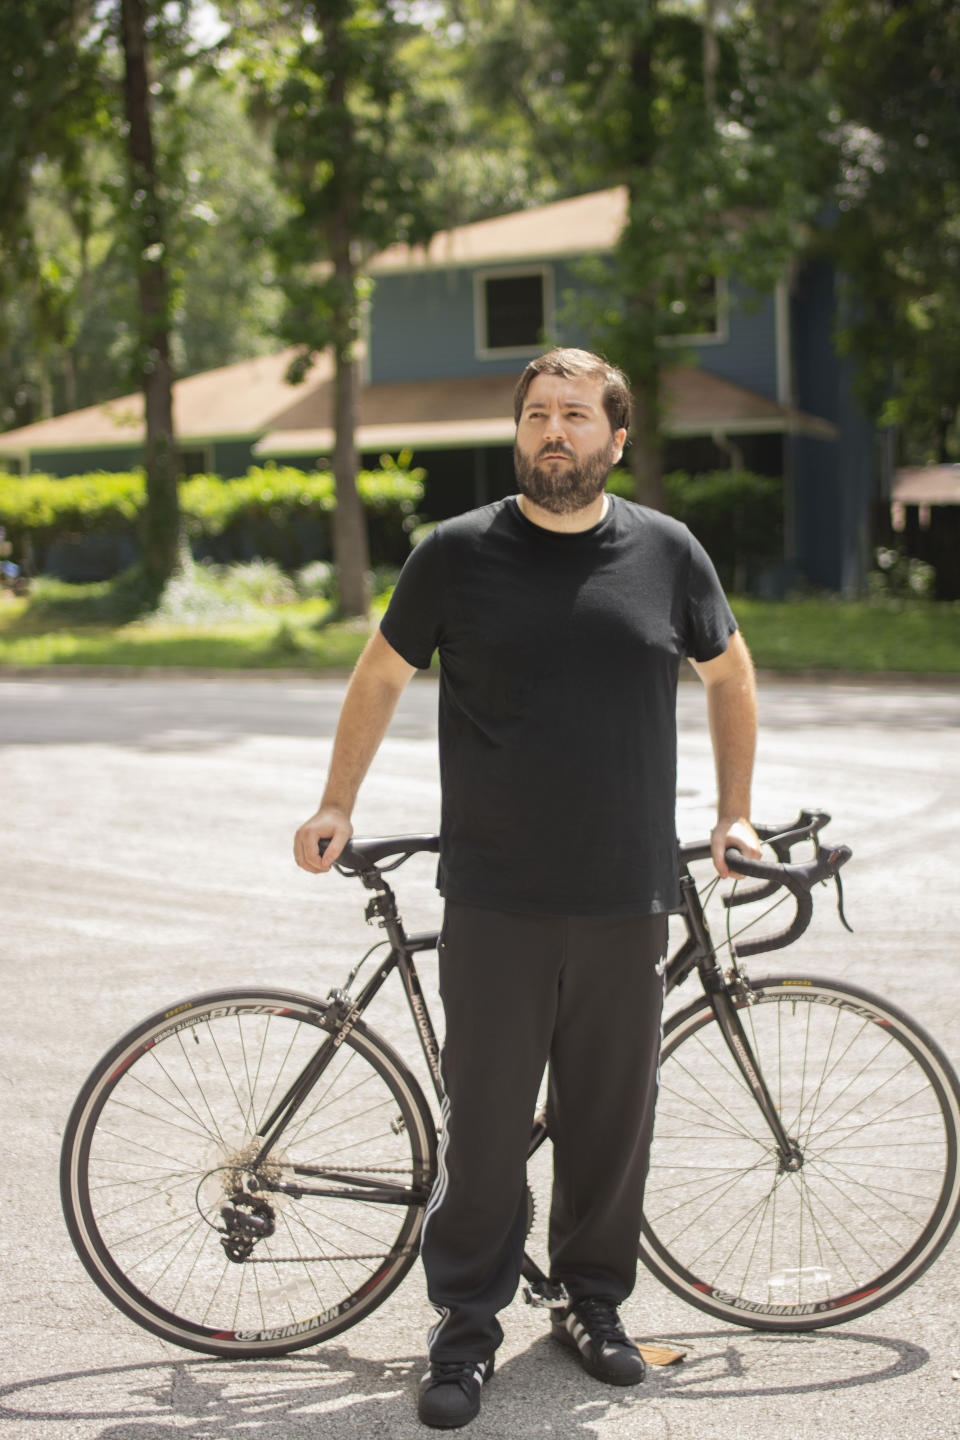 In this June 11, 2020, photo provided by Samuel Jones, his friend Zachary McCoy pauses on his bicycle in Gainesville, Fla. Local authorities considered McCoy a suspect in a house burglary because his Google location data showed he was near the house three times on the day the burglary occurred. McCoy said he rides his bike by the house regularly for exercise. Authorities were using geofence search warrants that allow law enforcement to gather data from Google on cellphone users and other devices near the scene of a crime. (Samuel Jones via AP)